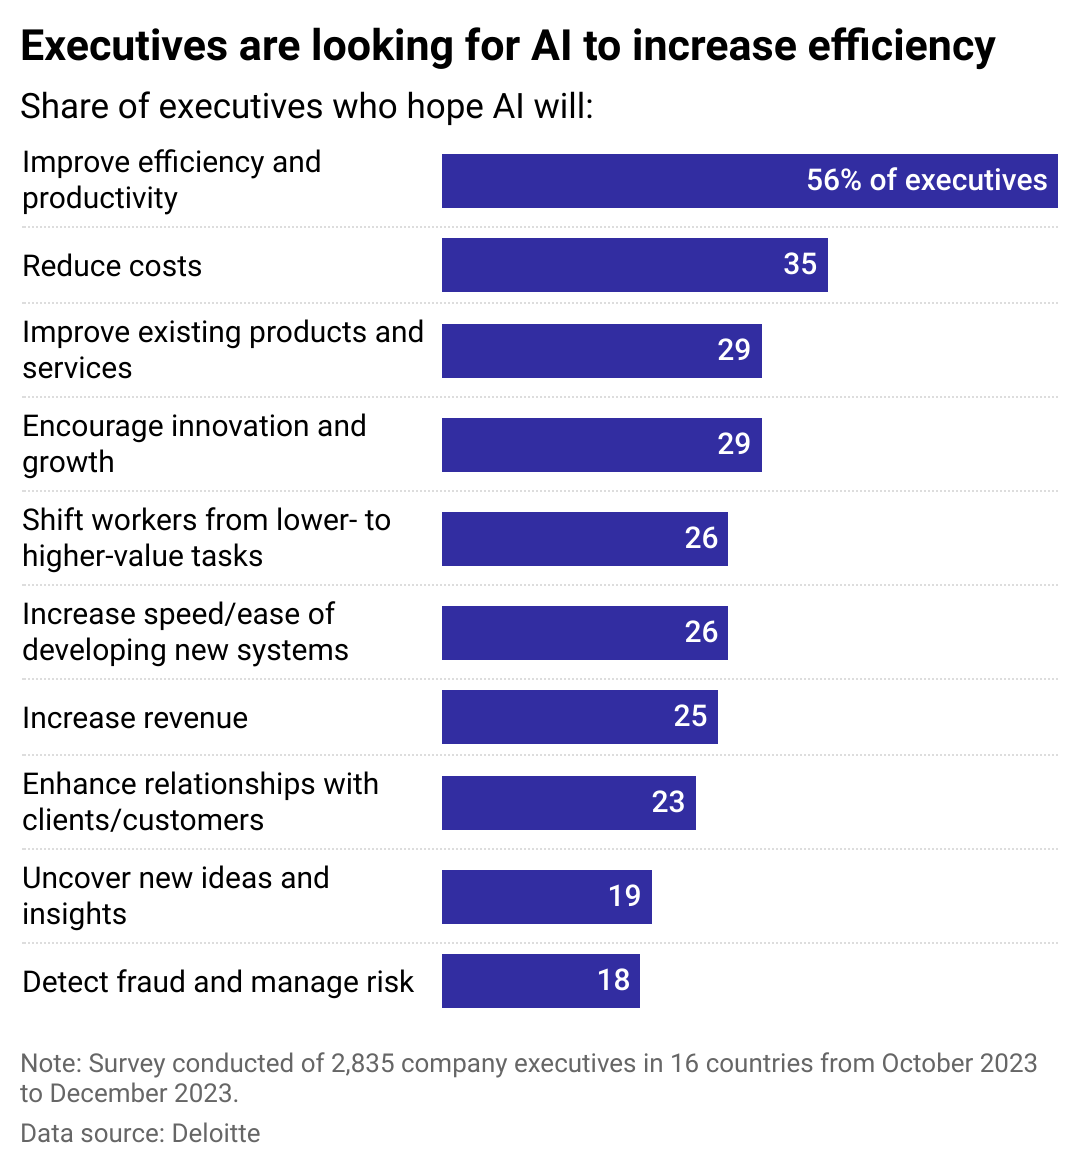 Line chart showing where executives hope AI will increase efficiency, with productivity leading with 56%.